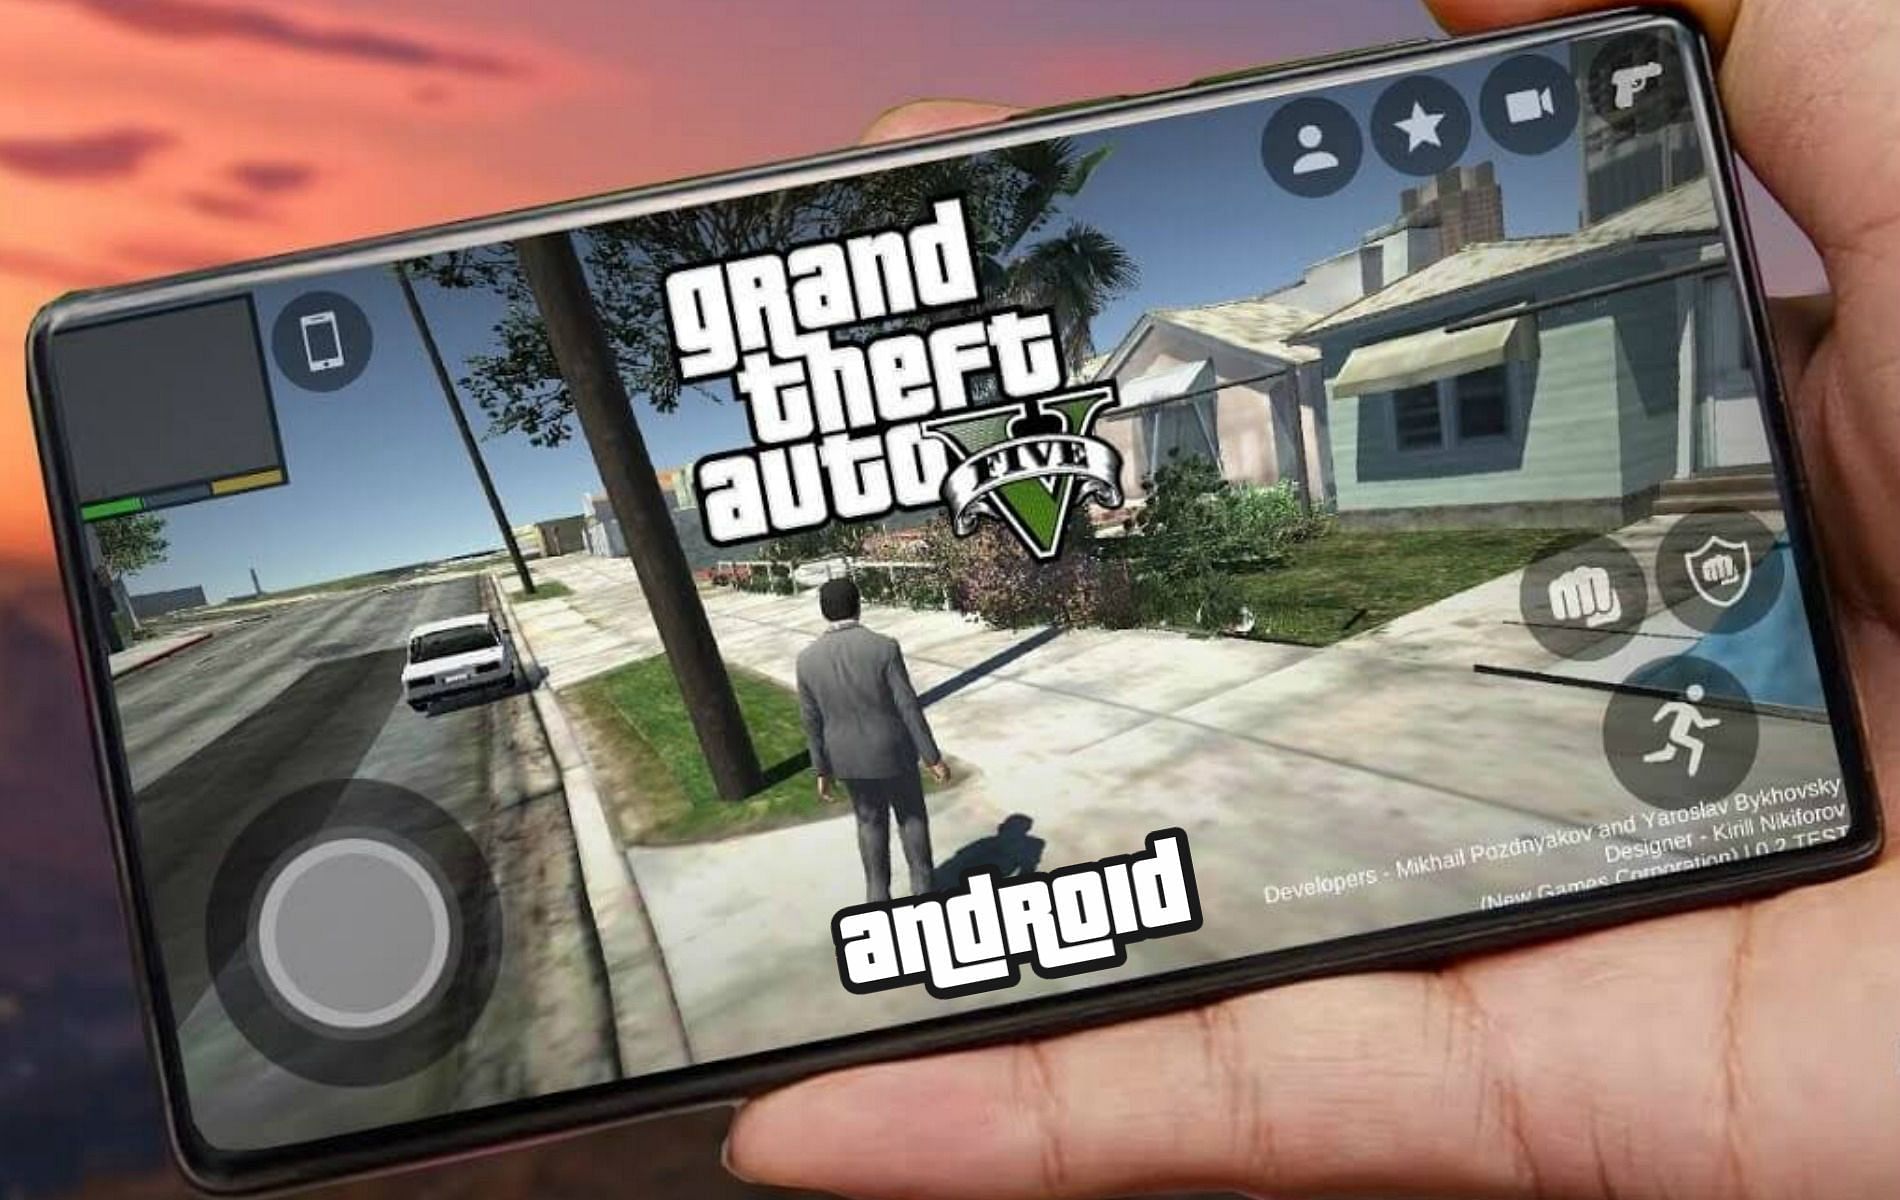 Why is GTA 5 APK not available for Android devices yet?